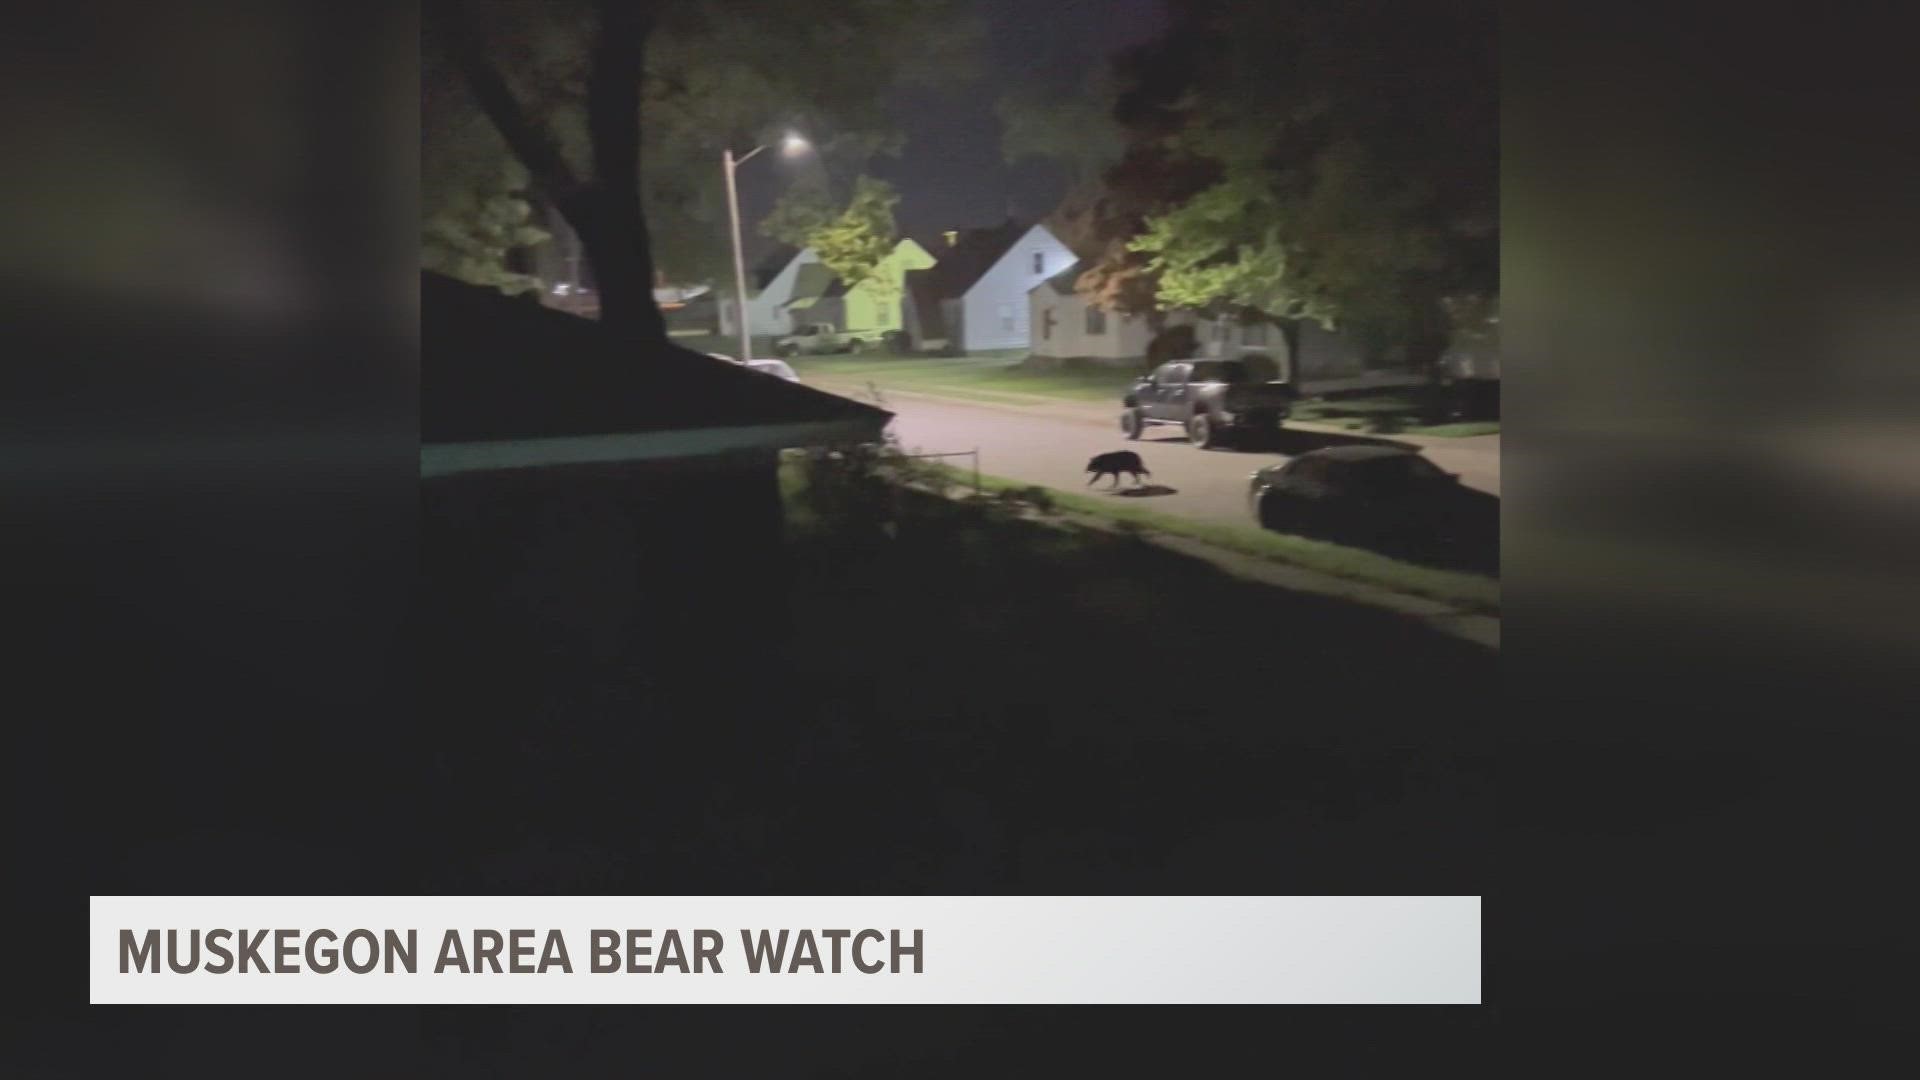 According to the DNR, the black bear seems to be moving West through the city.